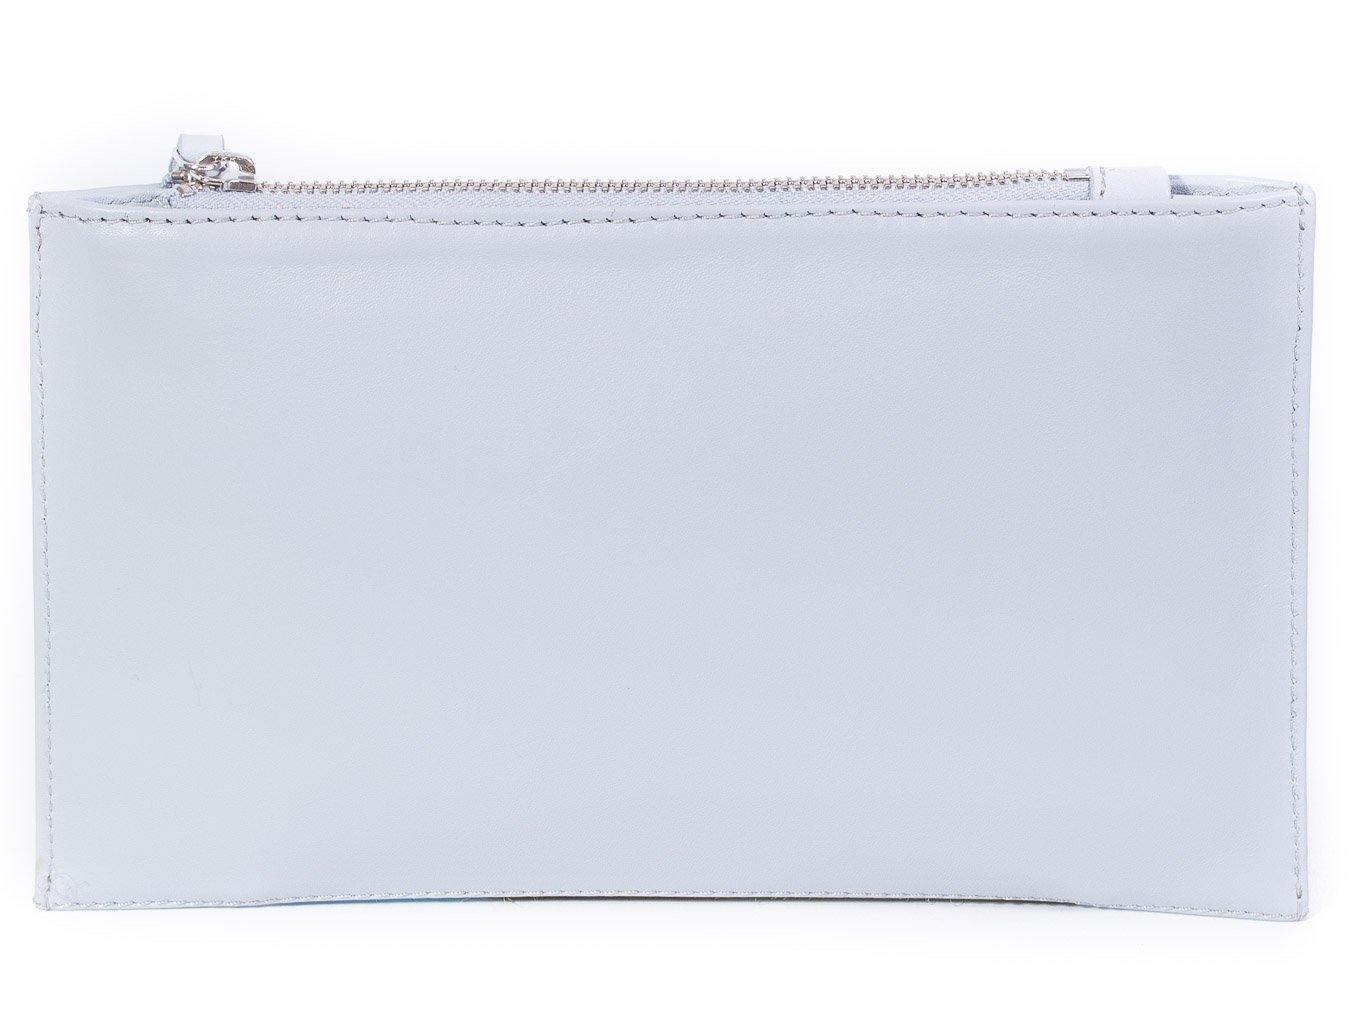 Clutch Springbok Handbag in Baby Blue with a stripe feature by Sherene Melinda back